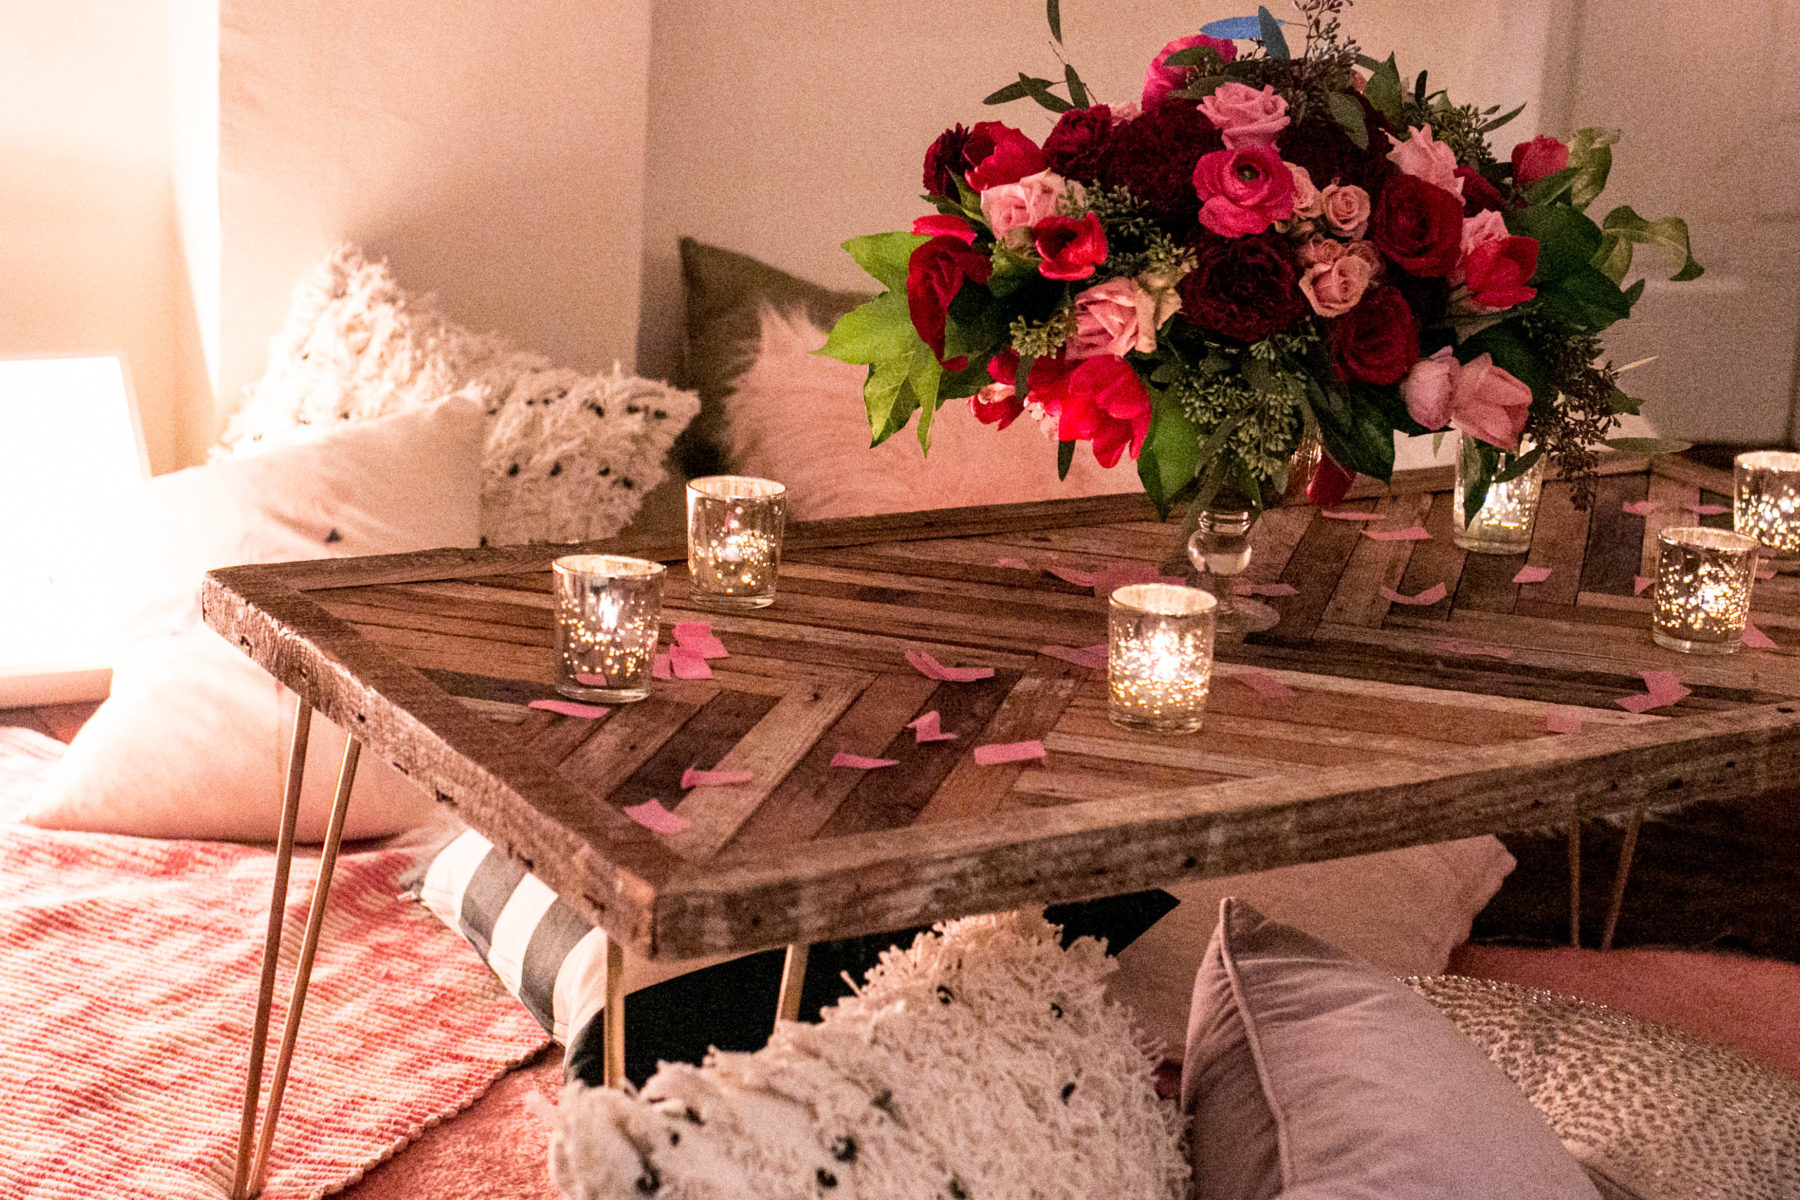 Galentine's Day table setting